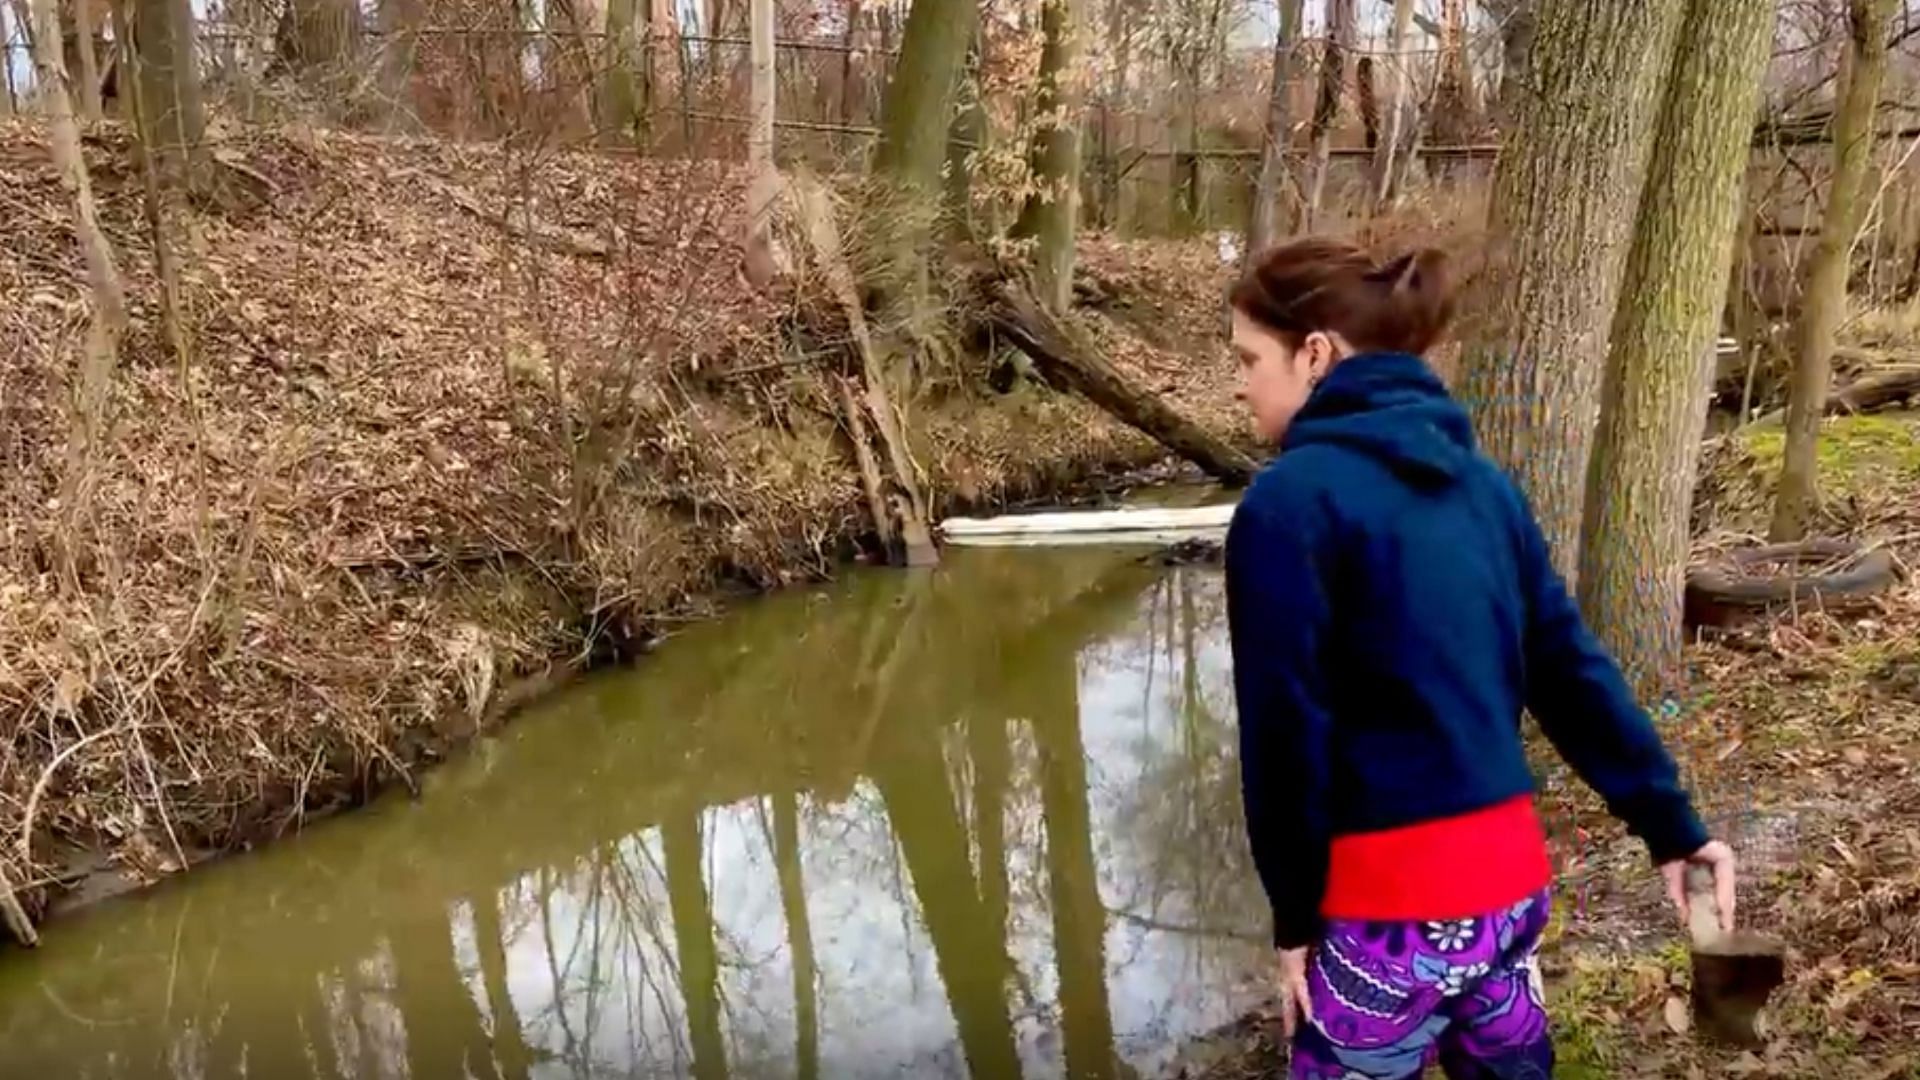 Video of contaminated water in East Palestine, Ohio leaves Louisville residents concerned (Image via nicksortor/Twitter)